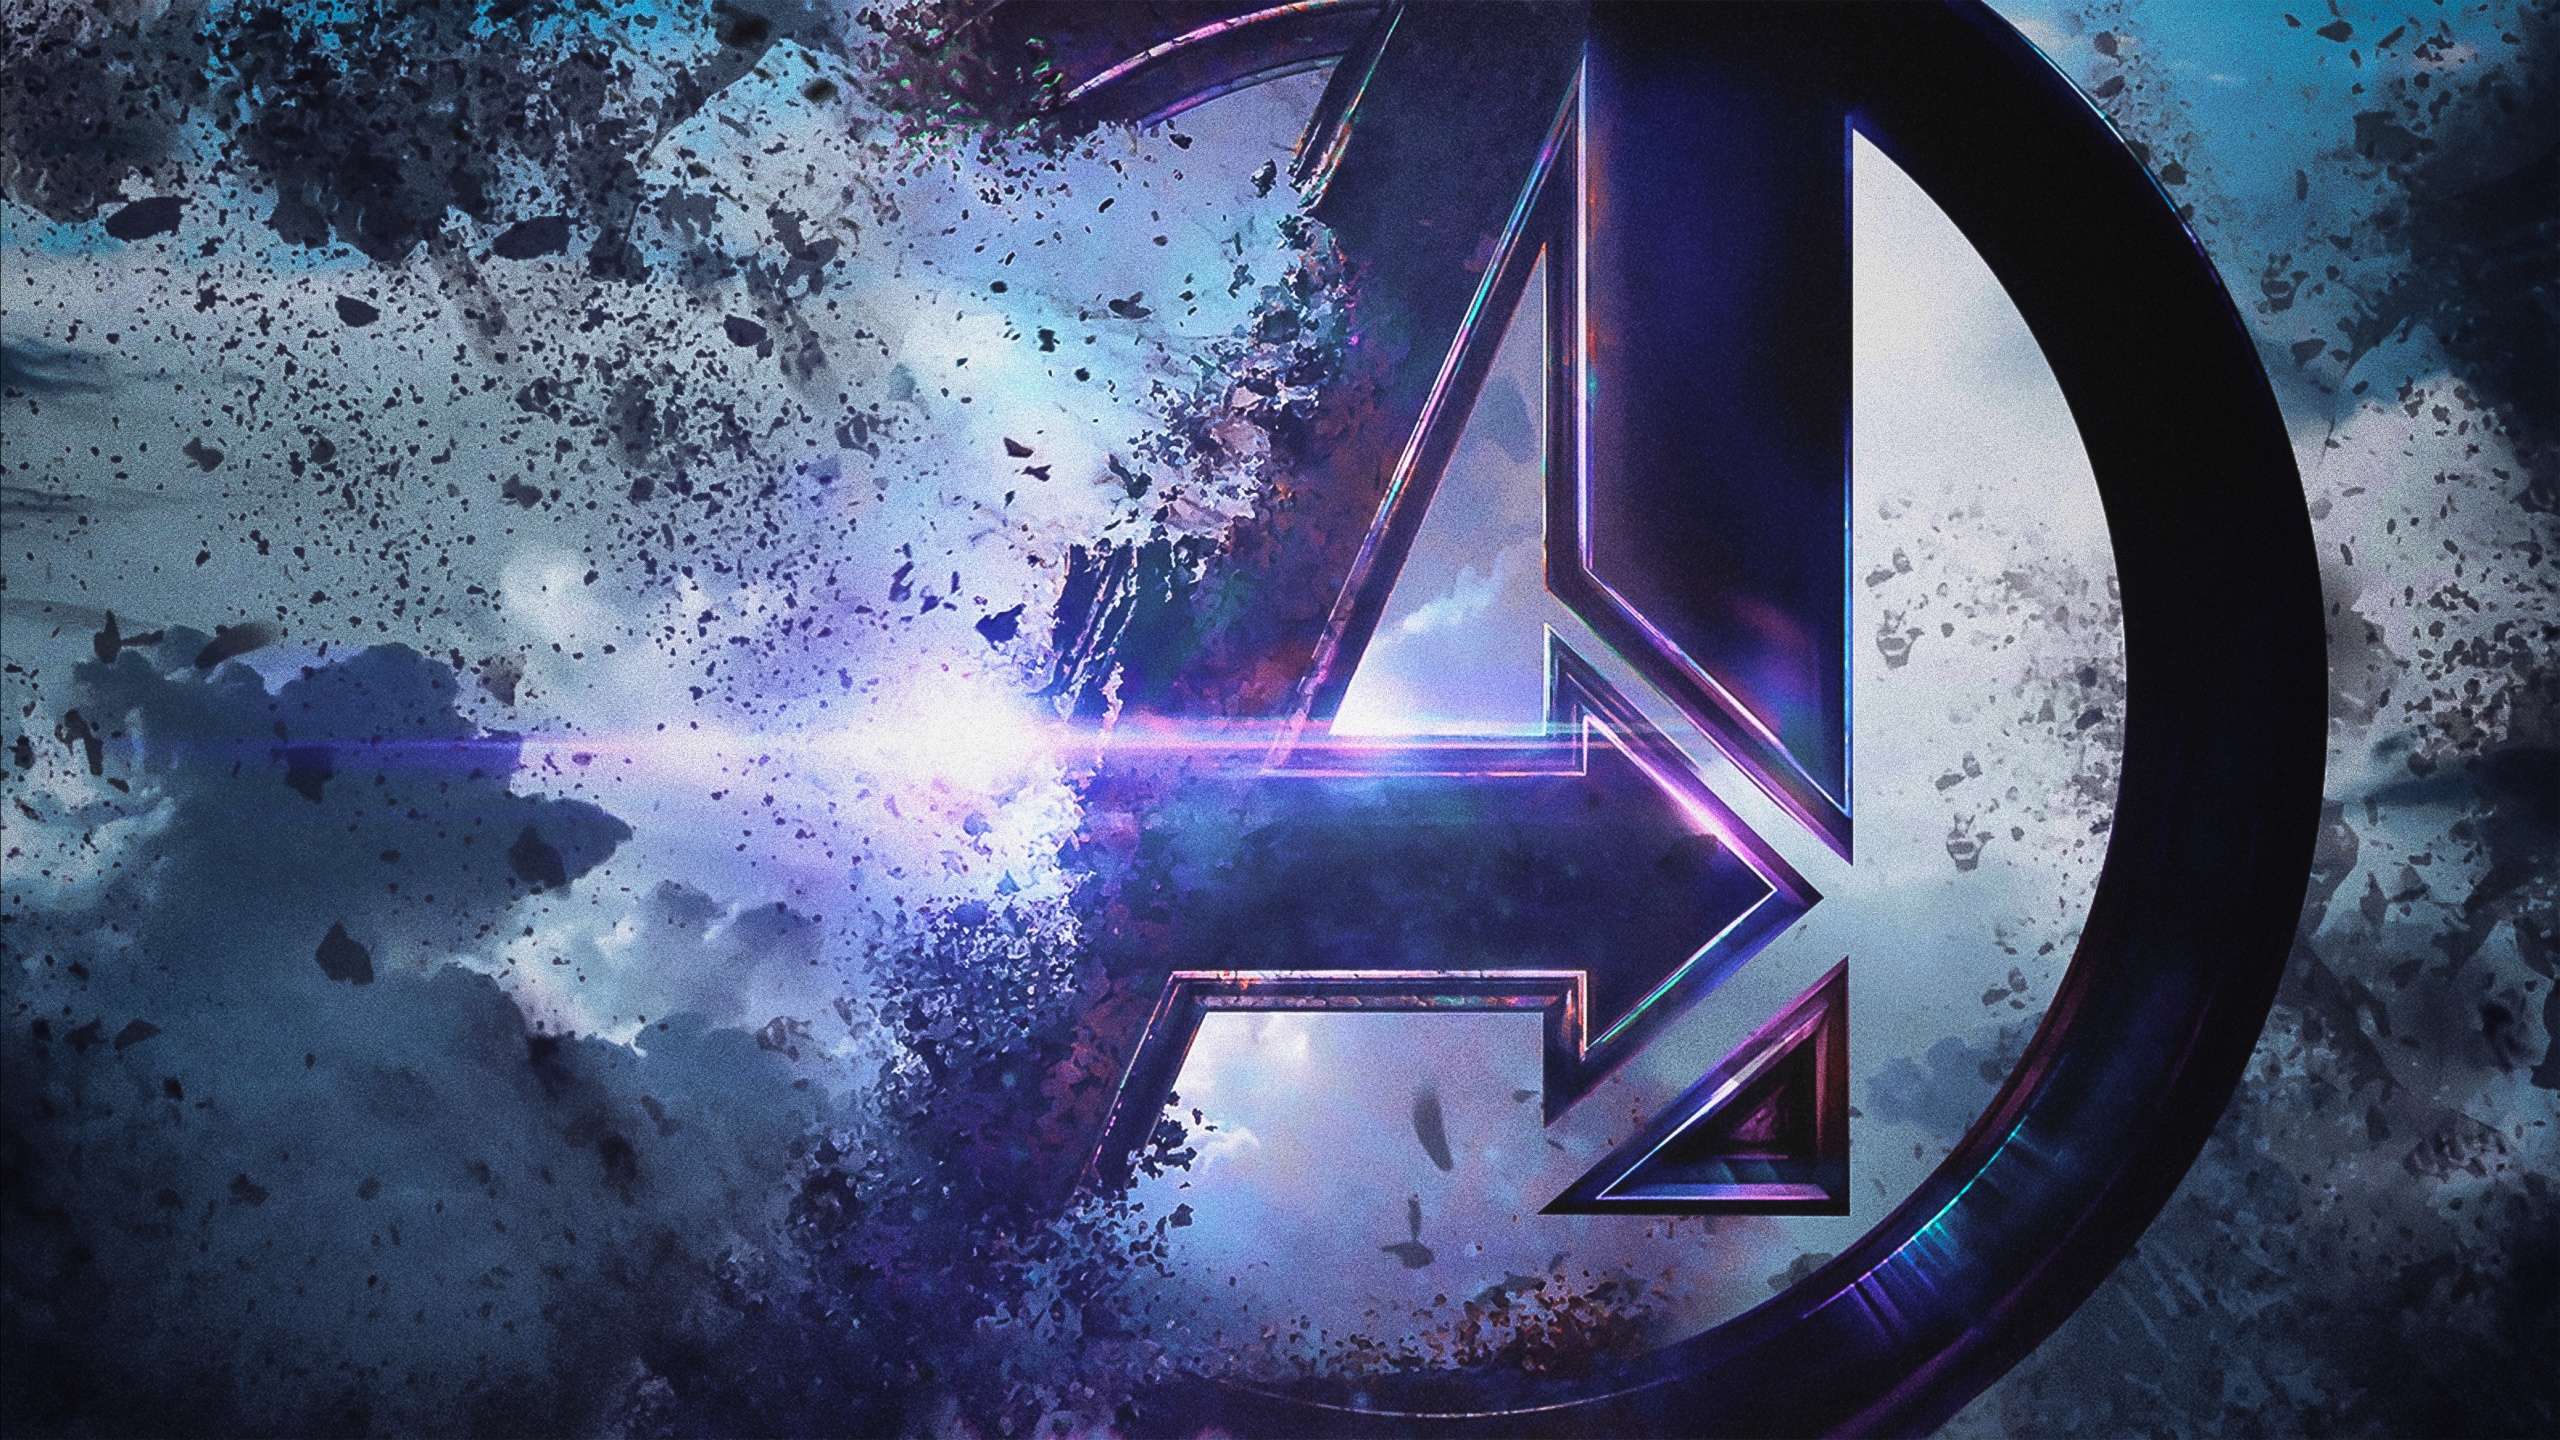 Top 999+ Avengers Iphone Wallpaper Full HD, 4K✓Free to Use